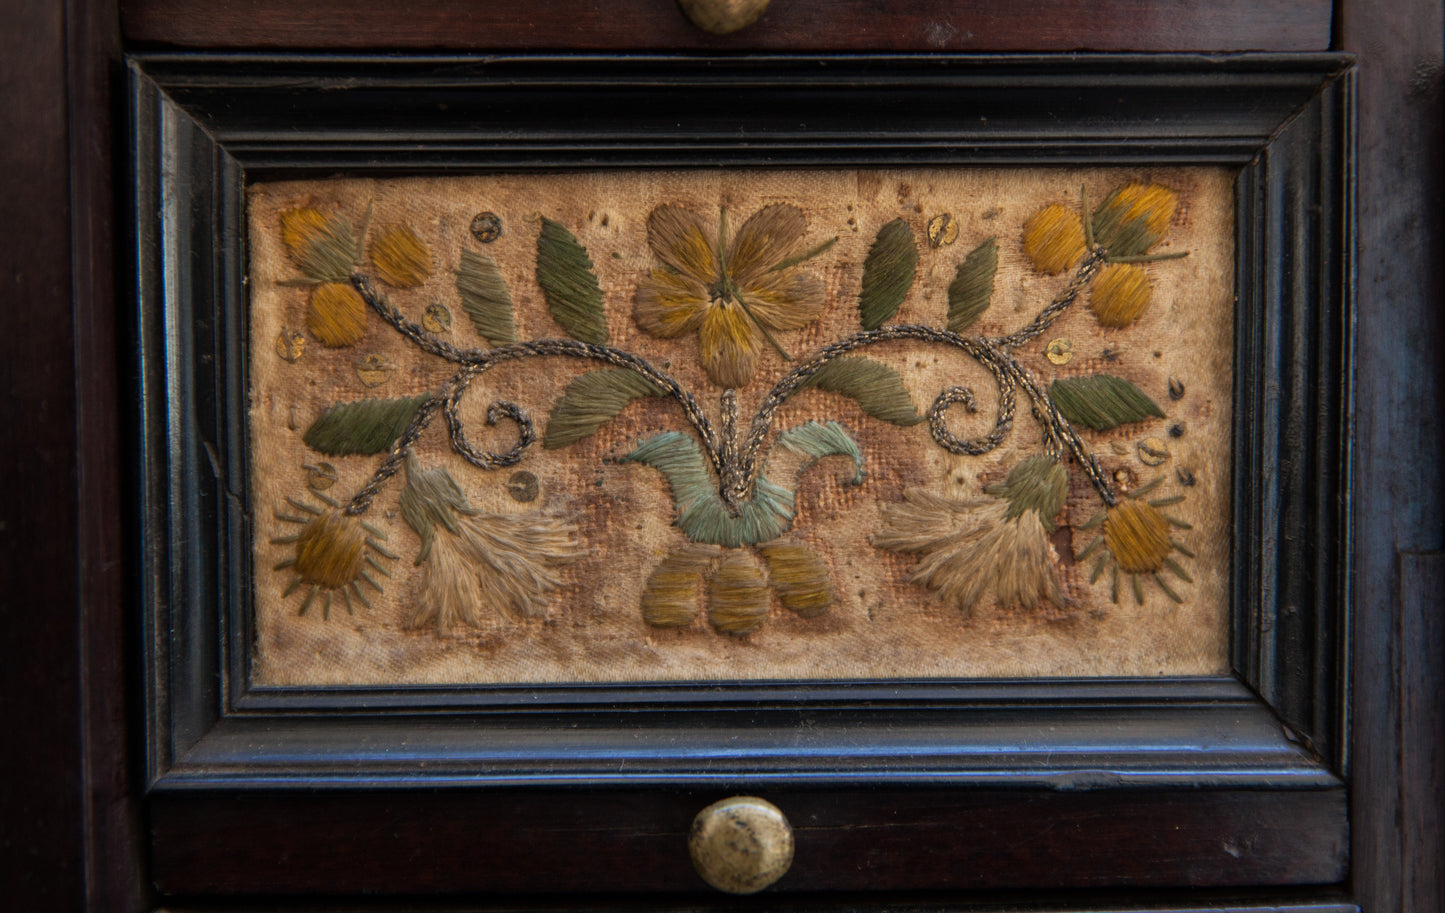 Very rare Collector's Cabinet, Antwerp, 17th century. Embroidered panels.